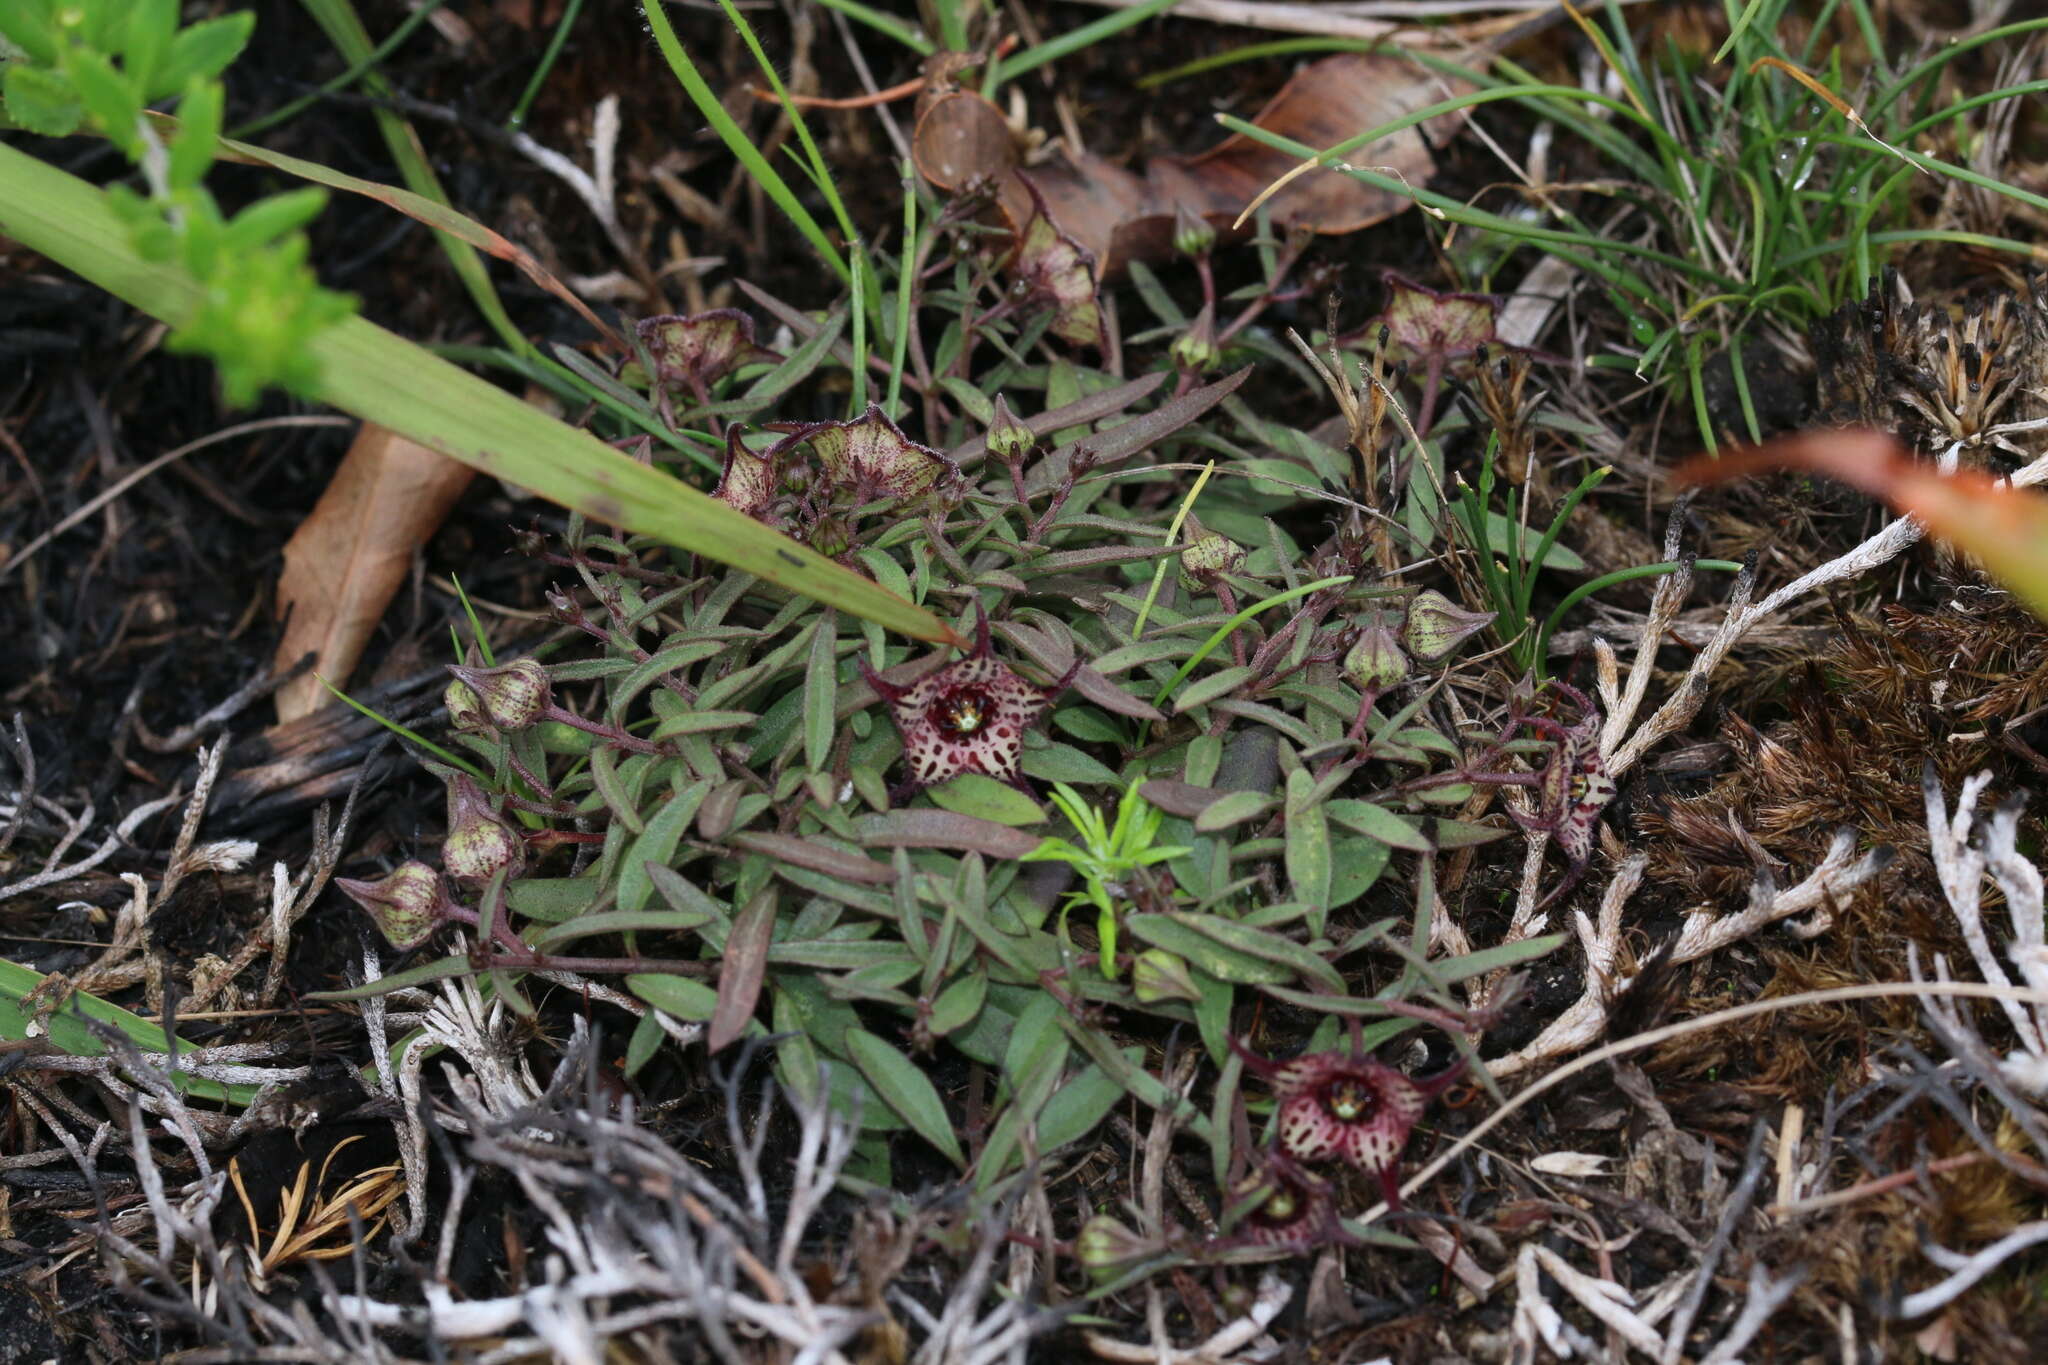 Image of Ceropegia australis (R. A. Dyer) Bruyns